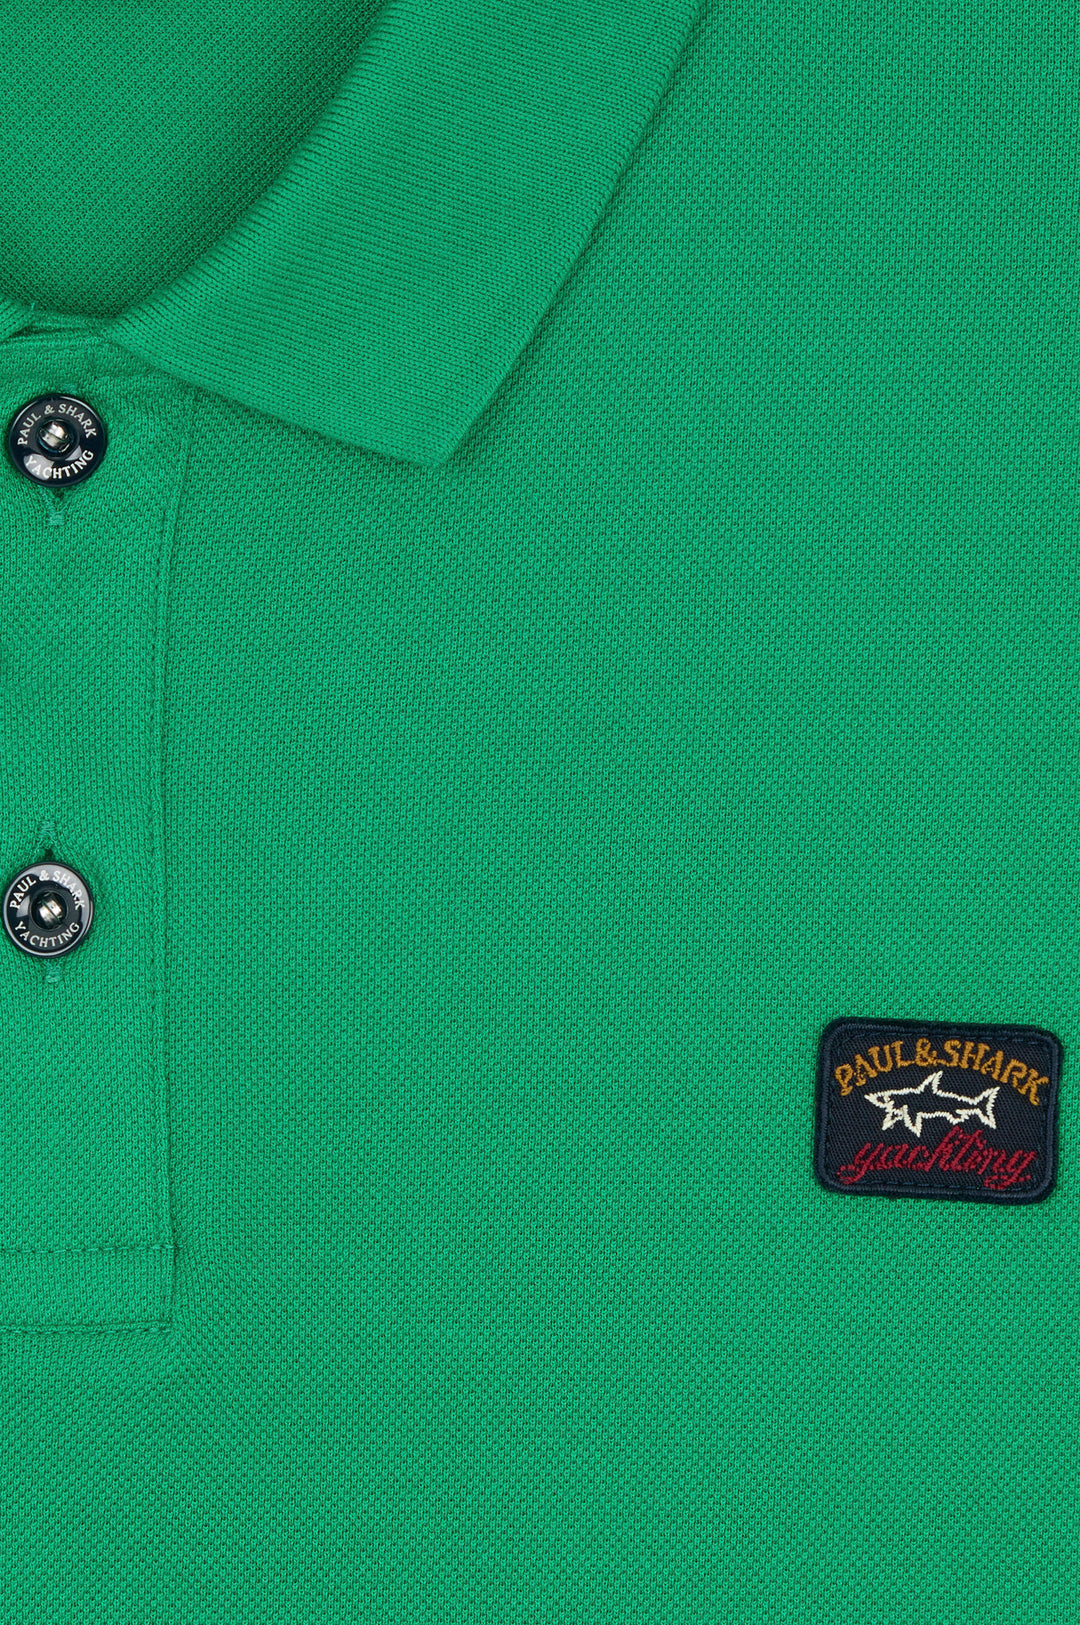 Cotton Pique Short Sleeve Polo with Iconic Badge in Green